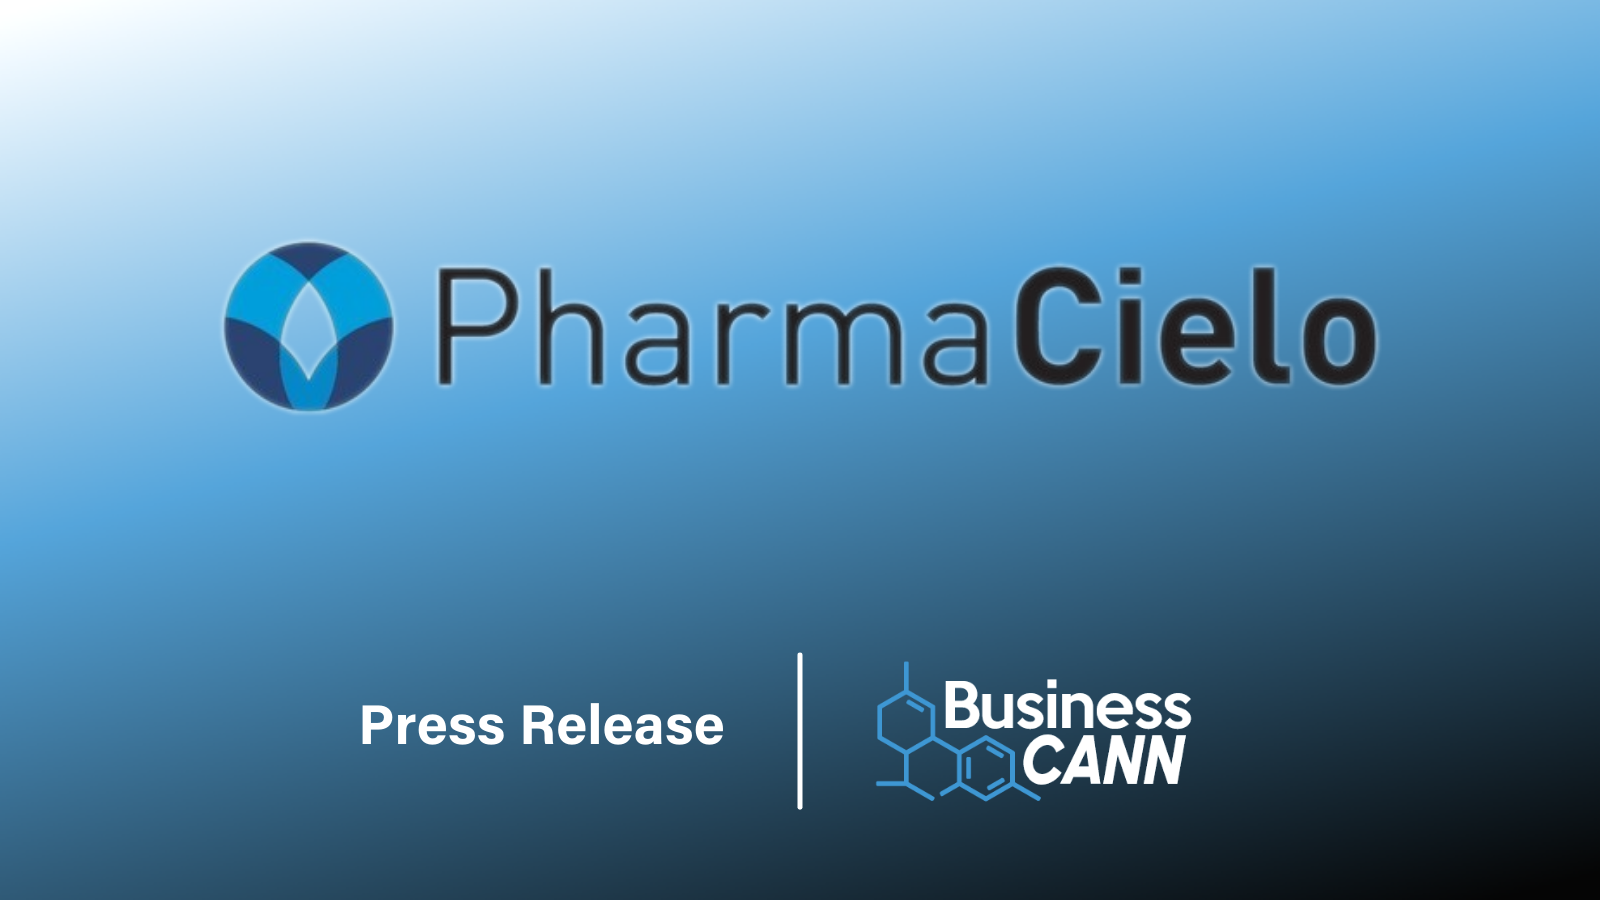 PharmaCielo has today announced that it will start supplying the German market with three THC-dominant products, with commercial shipments expected to begin in late 2022.